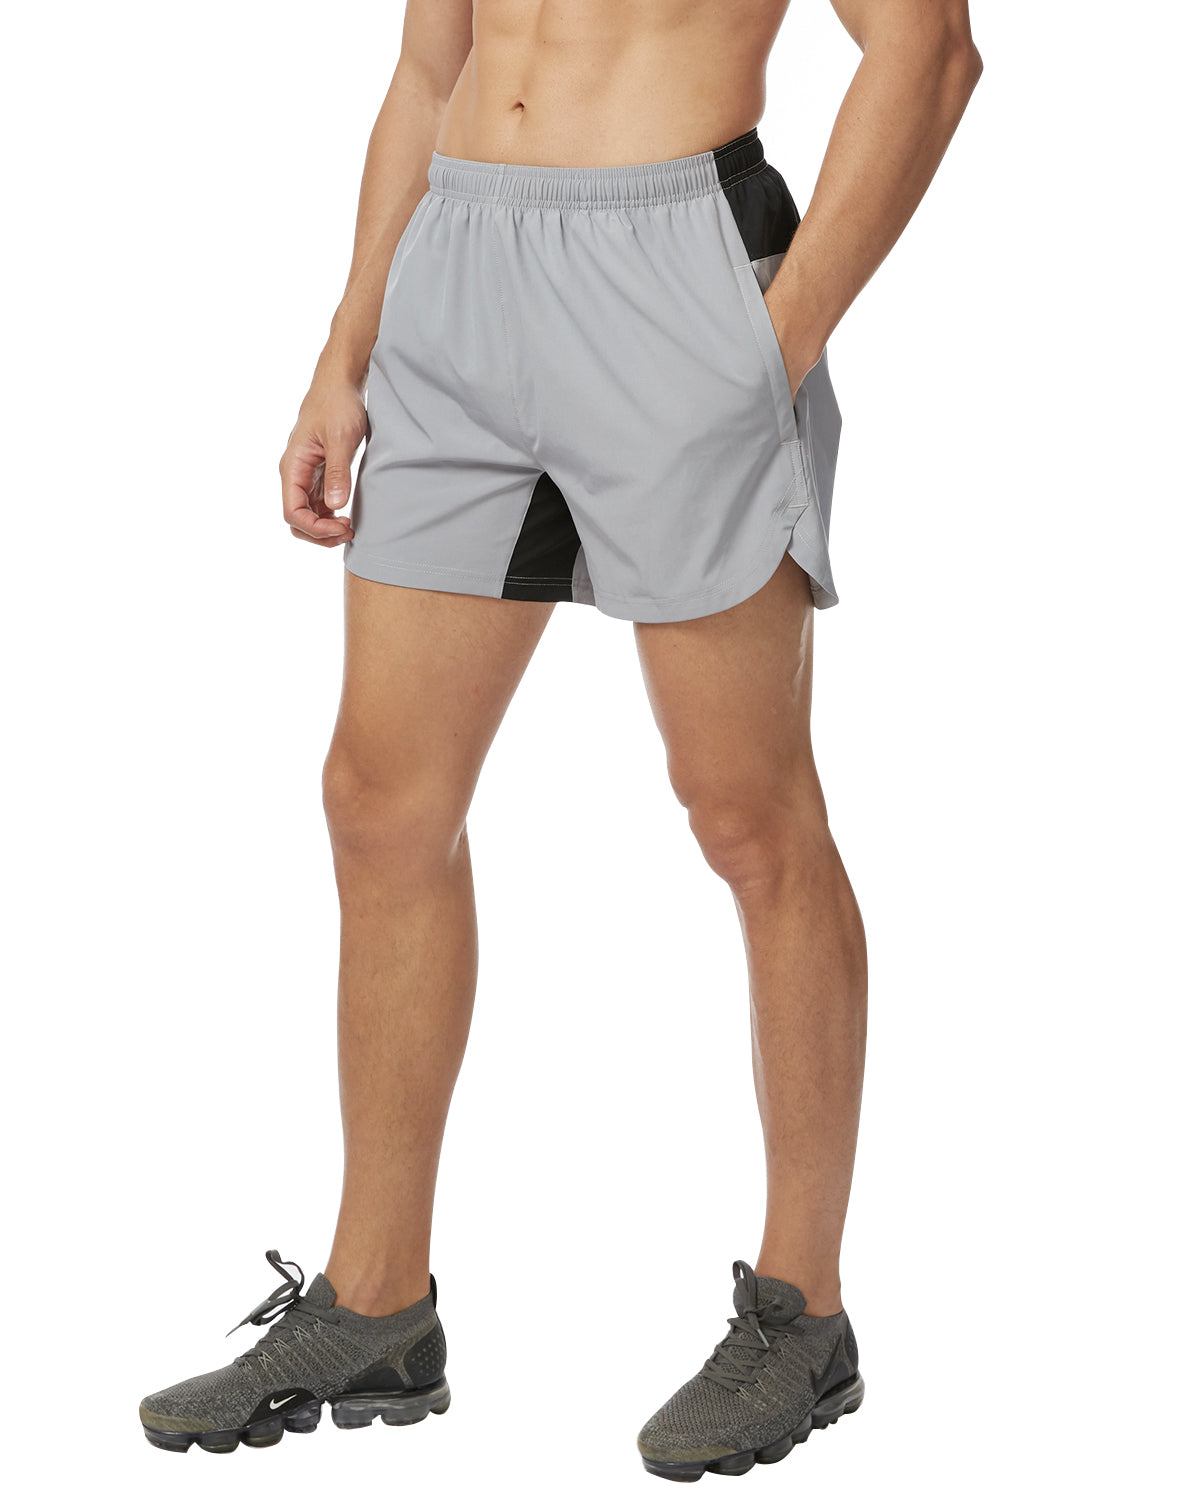 VAYAGER Men's 5 Inch Workout Shorts with Liner and Zipper Pockets